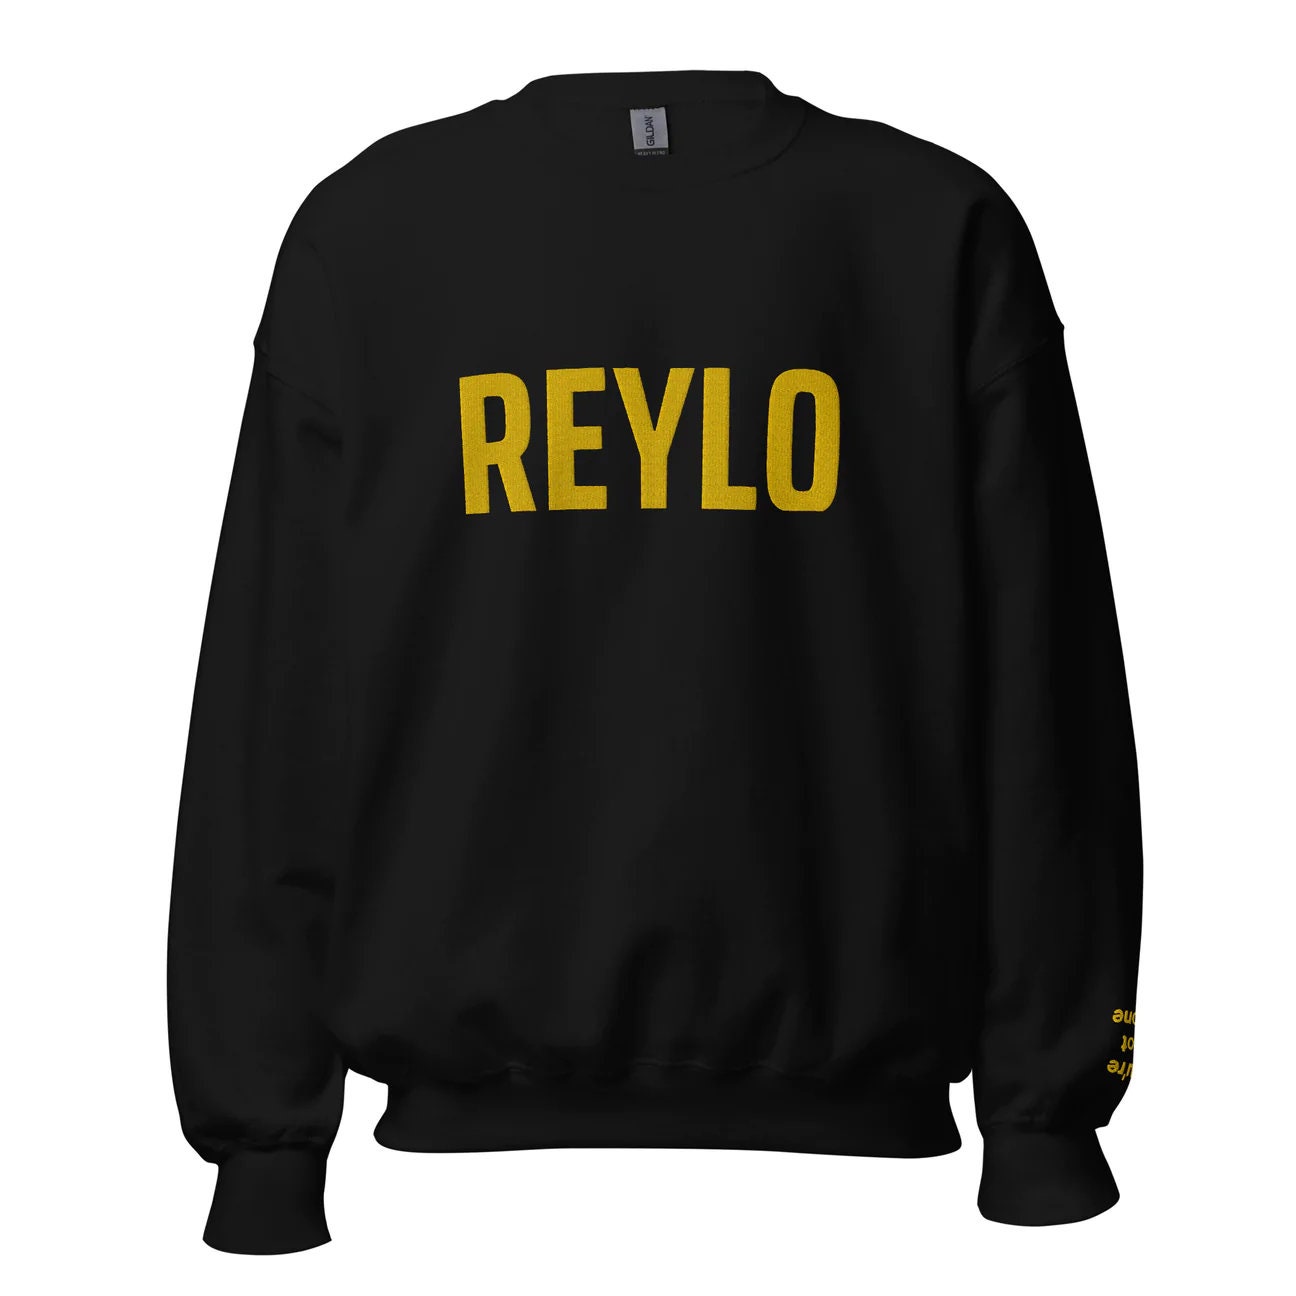 Kylo Rey Forest Dyad Sweatpants, Girl I've Heard so Much About